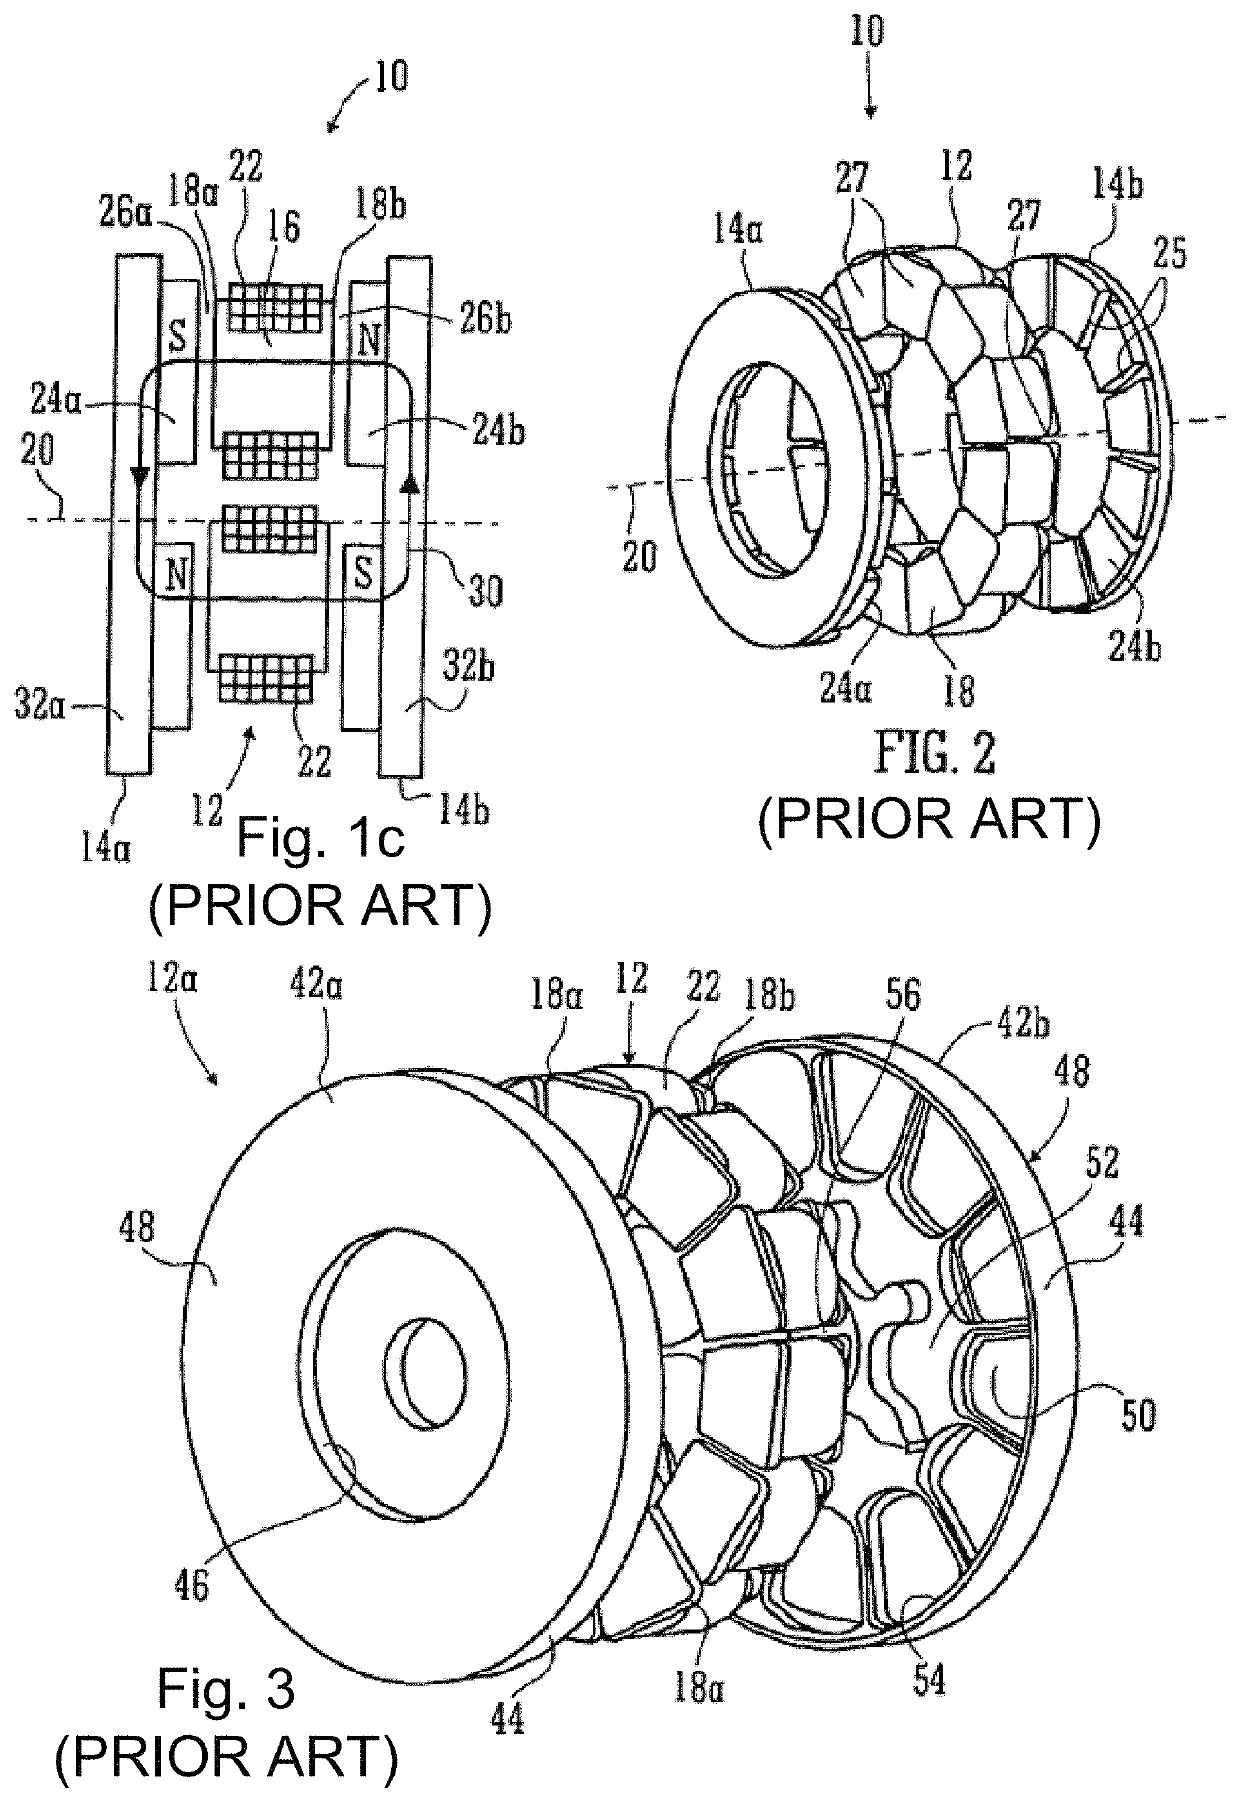 Asymmetric axial permanent magnet machines having axial rotors with irregular magnets